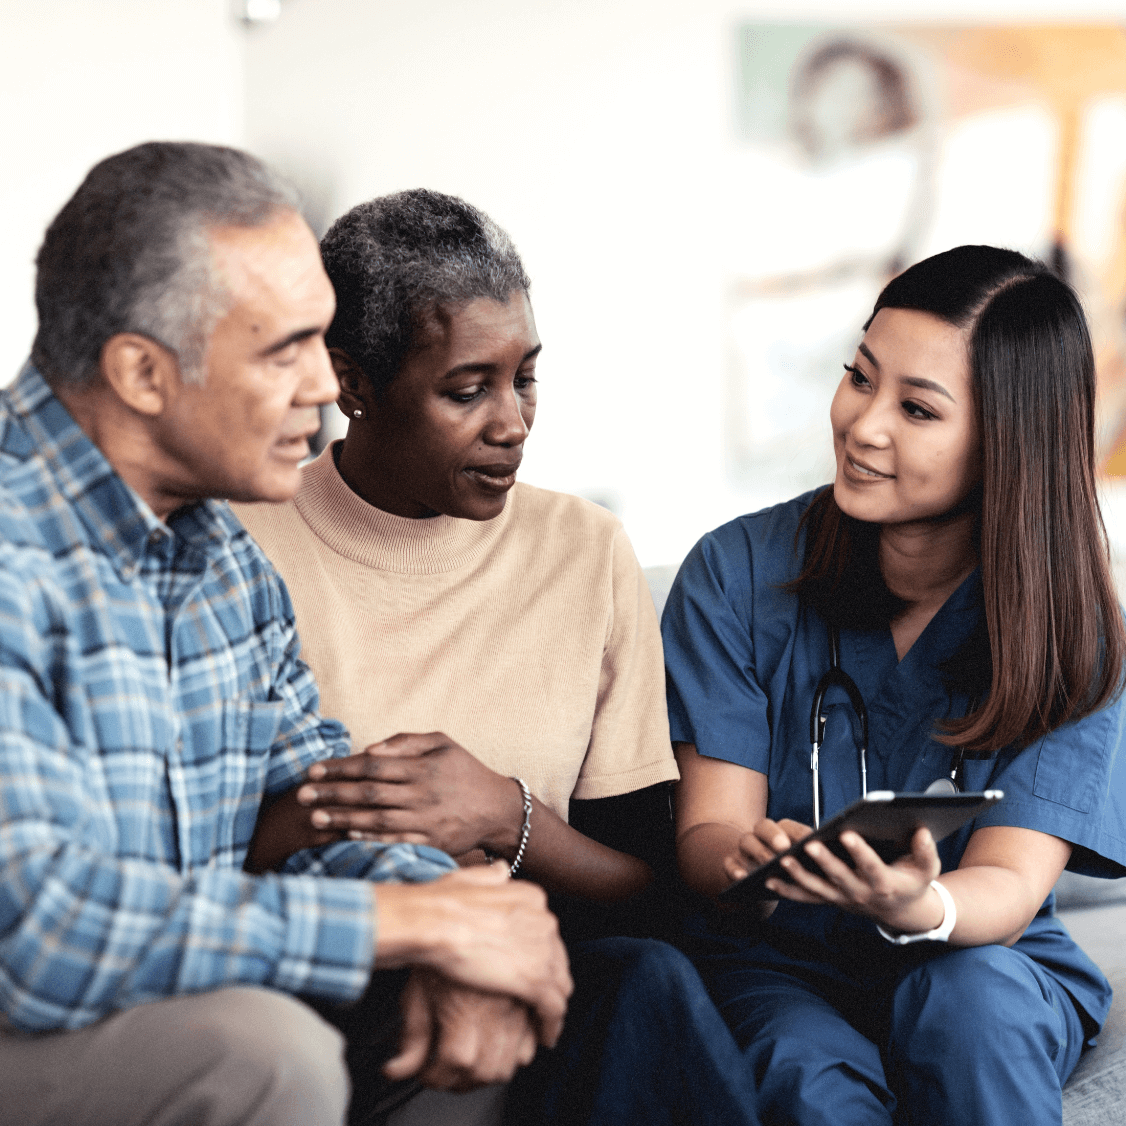 Connecting their circle of care